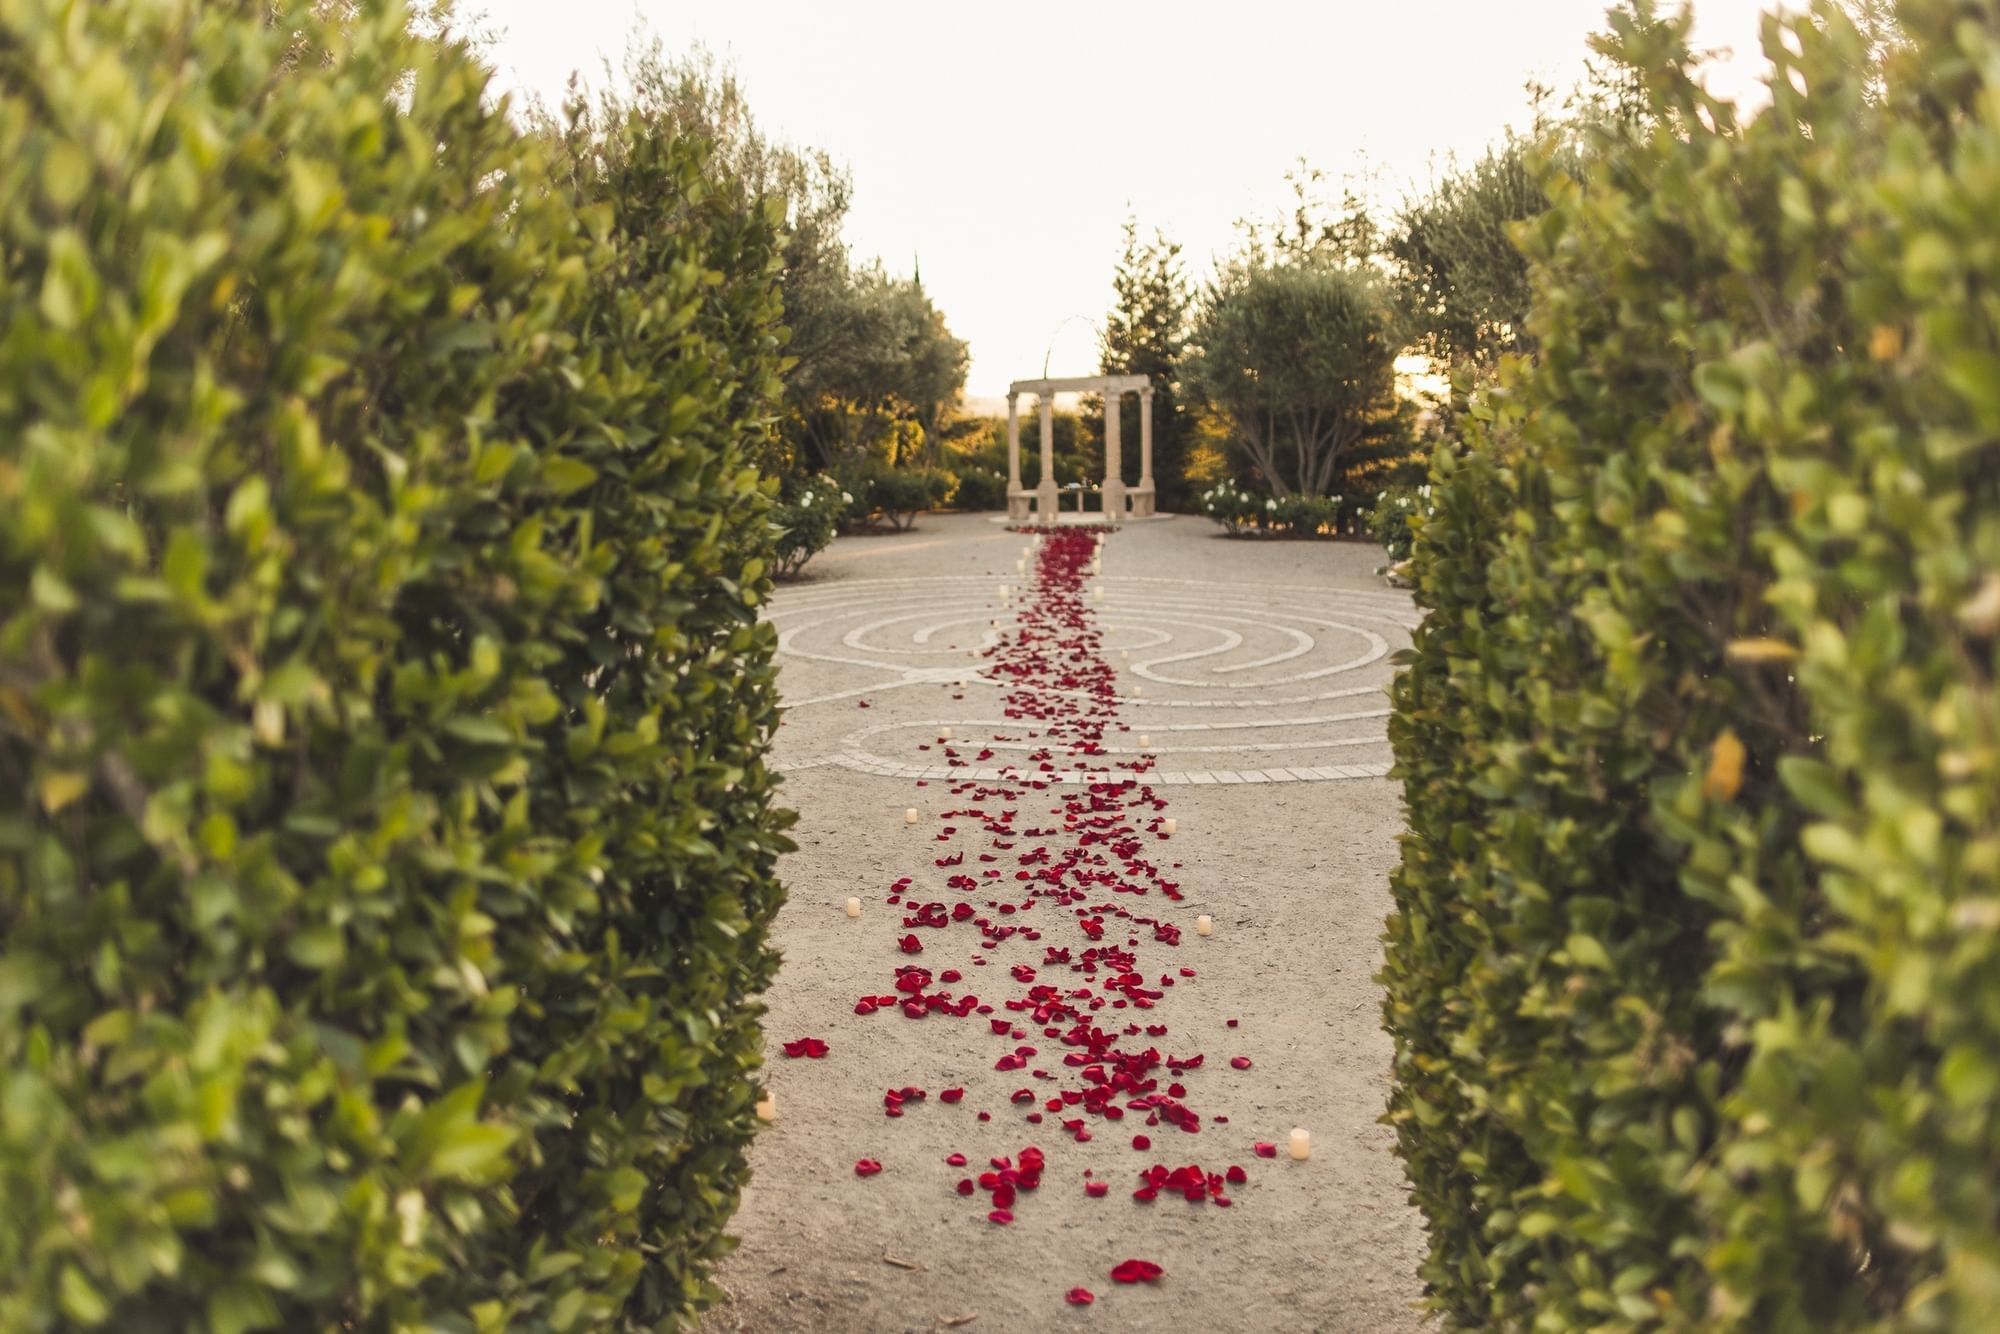 Trail of red rose petals outdoors leading to gazebo